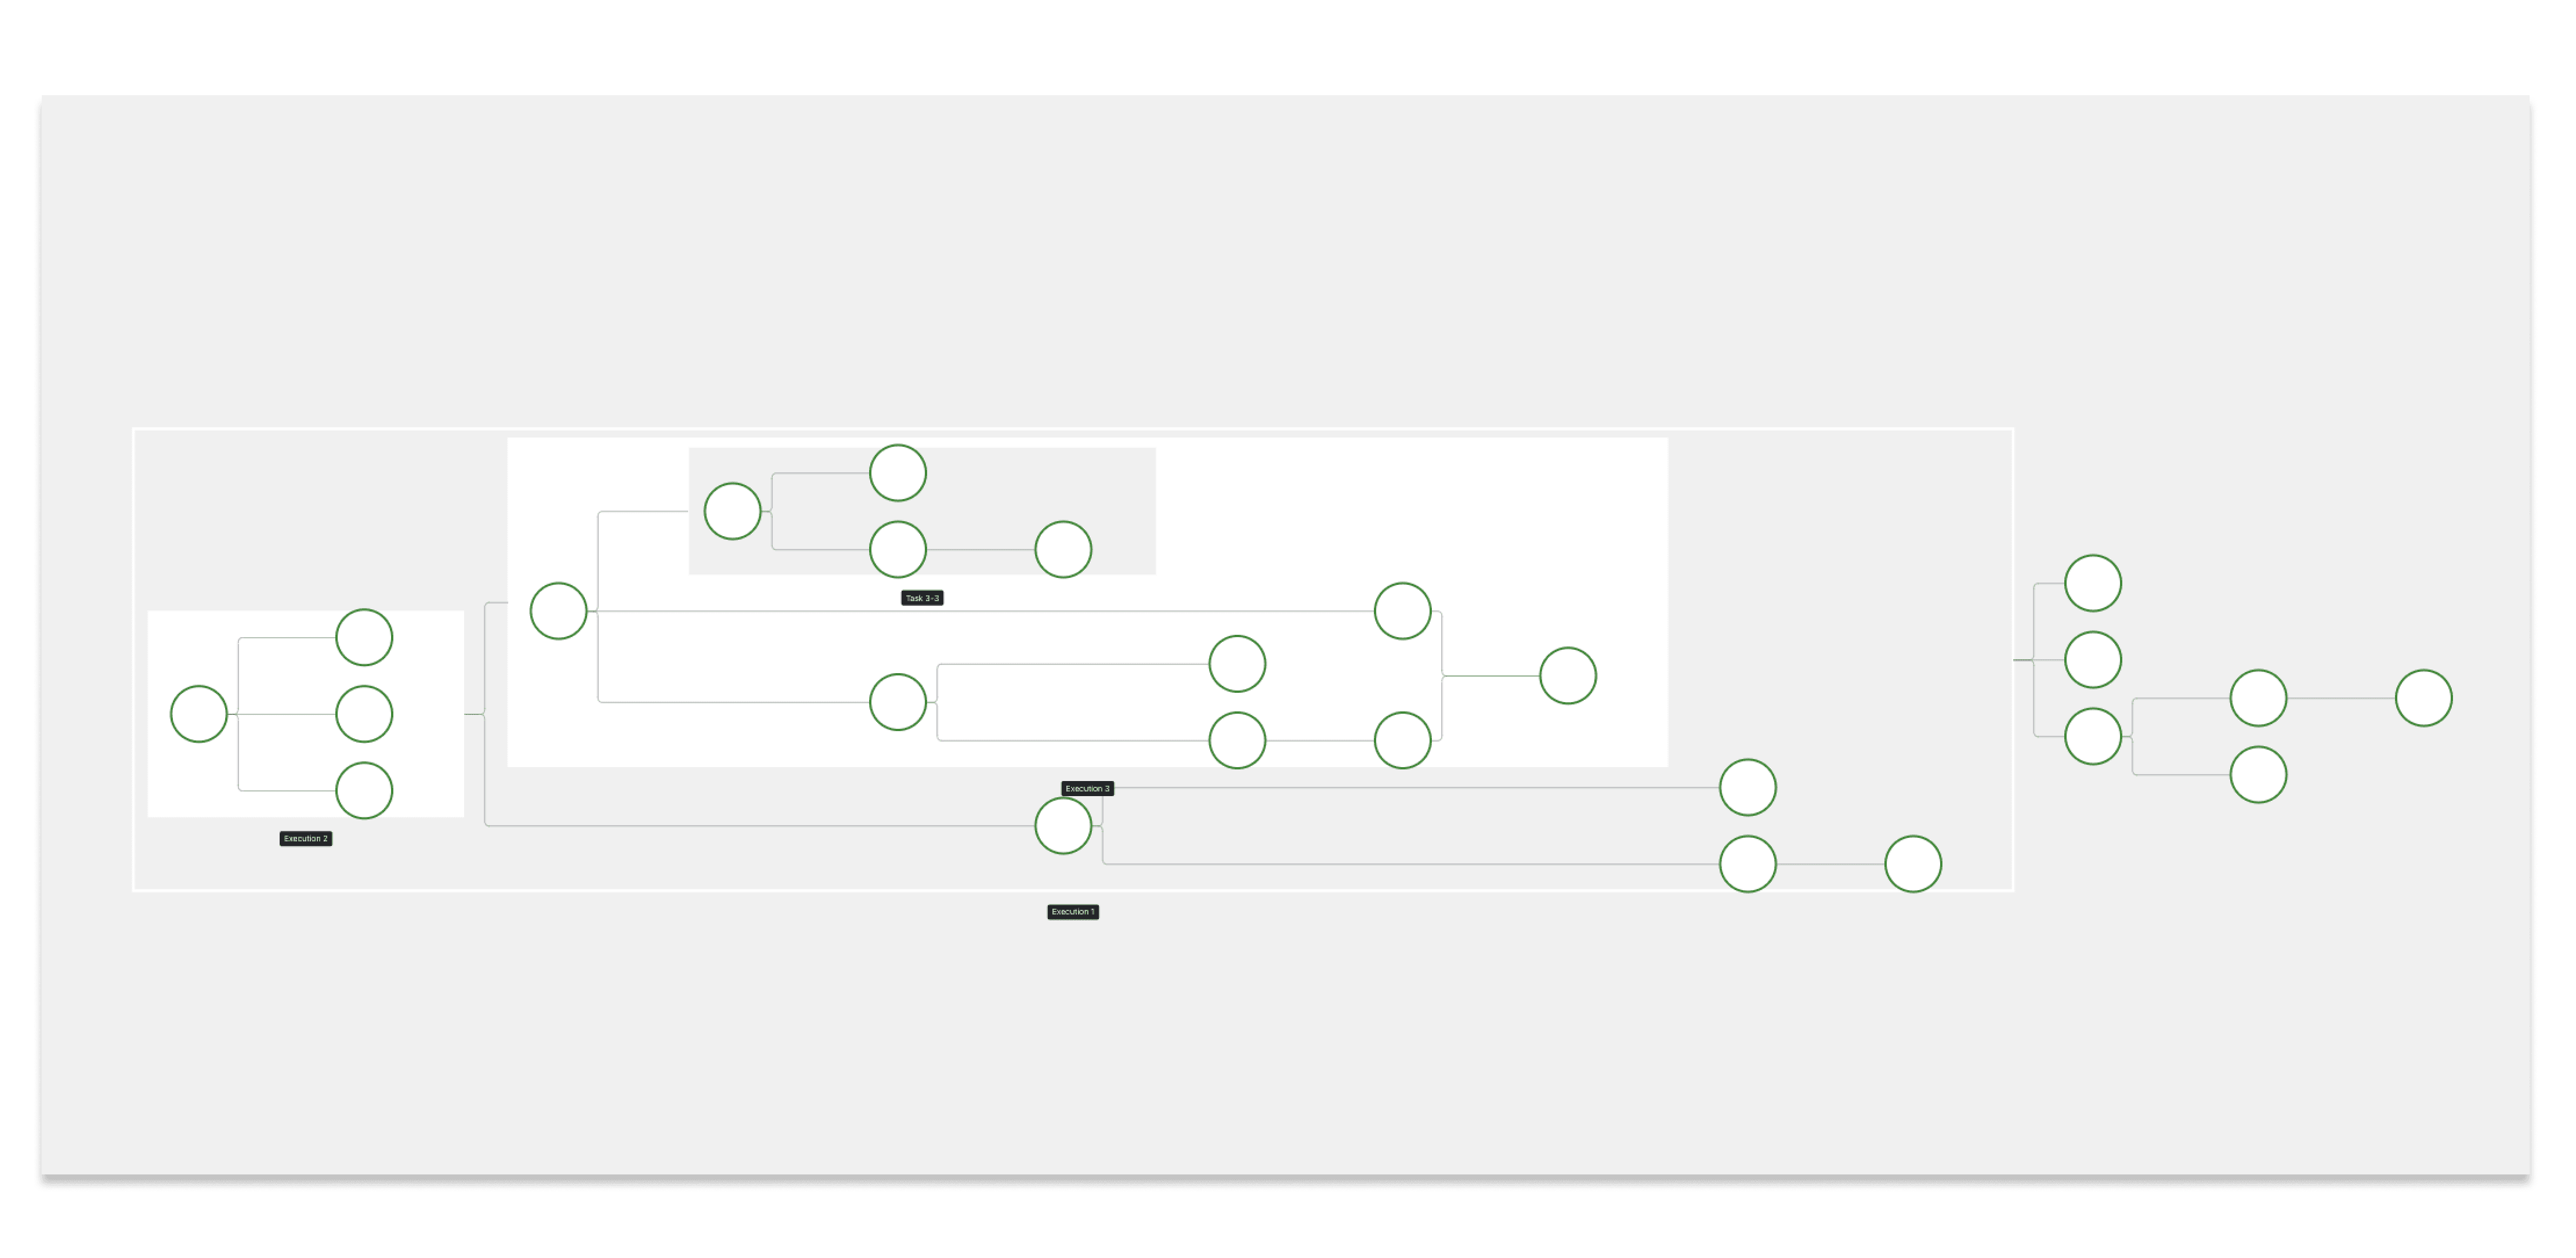 Multiple topology pipelines grouped within a pipeline.